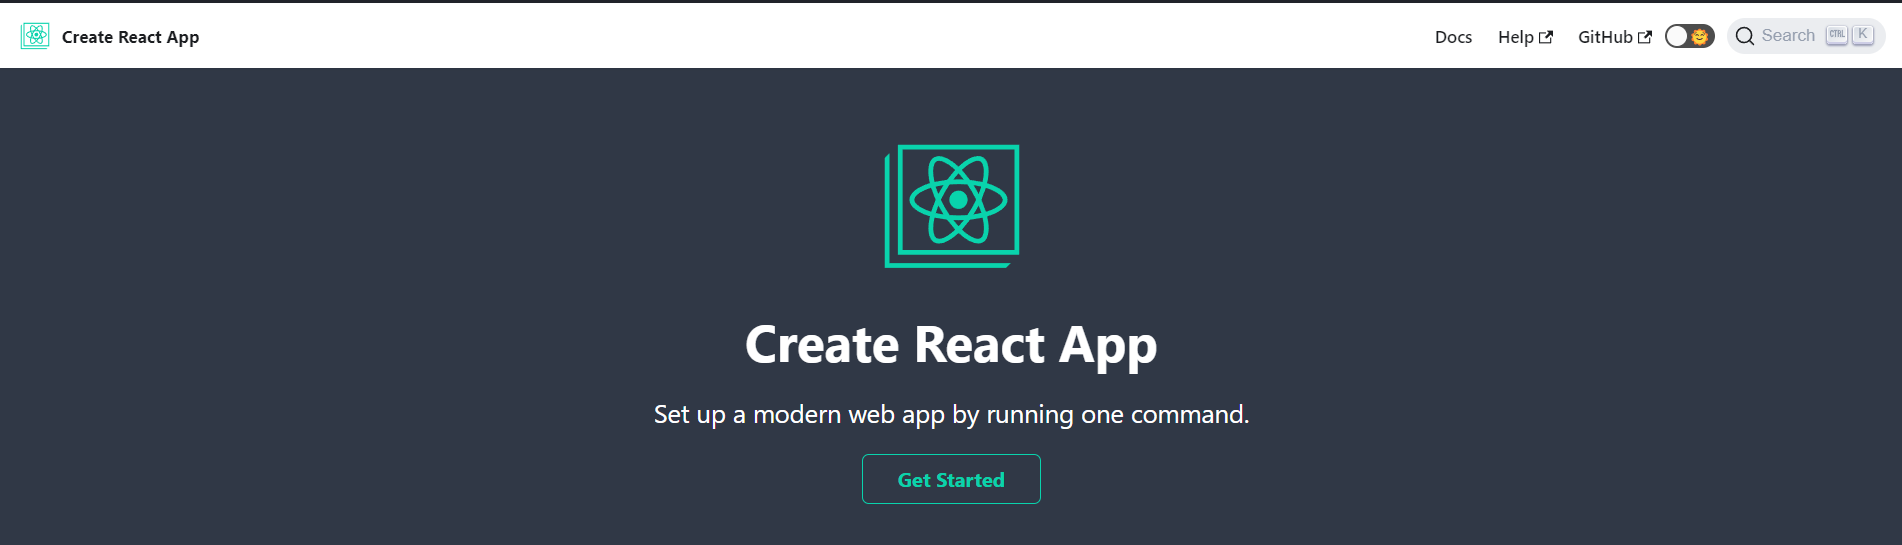 the home page of create react app